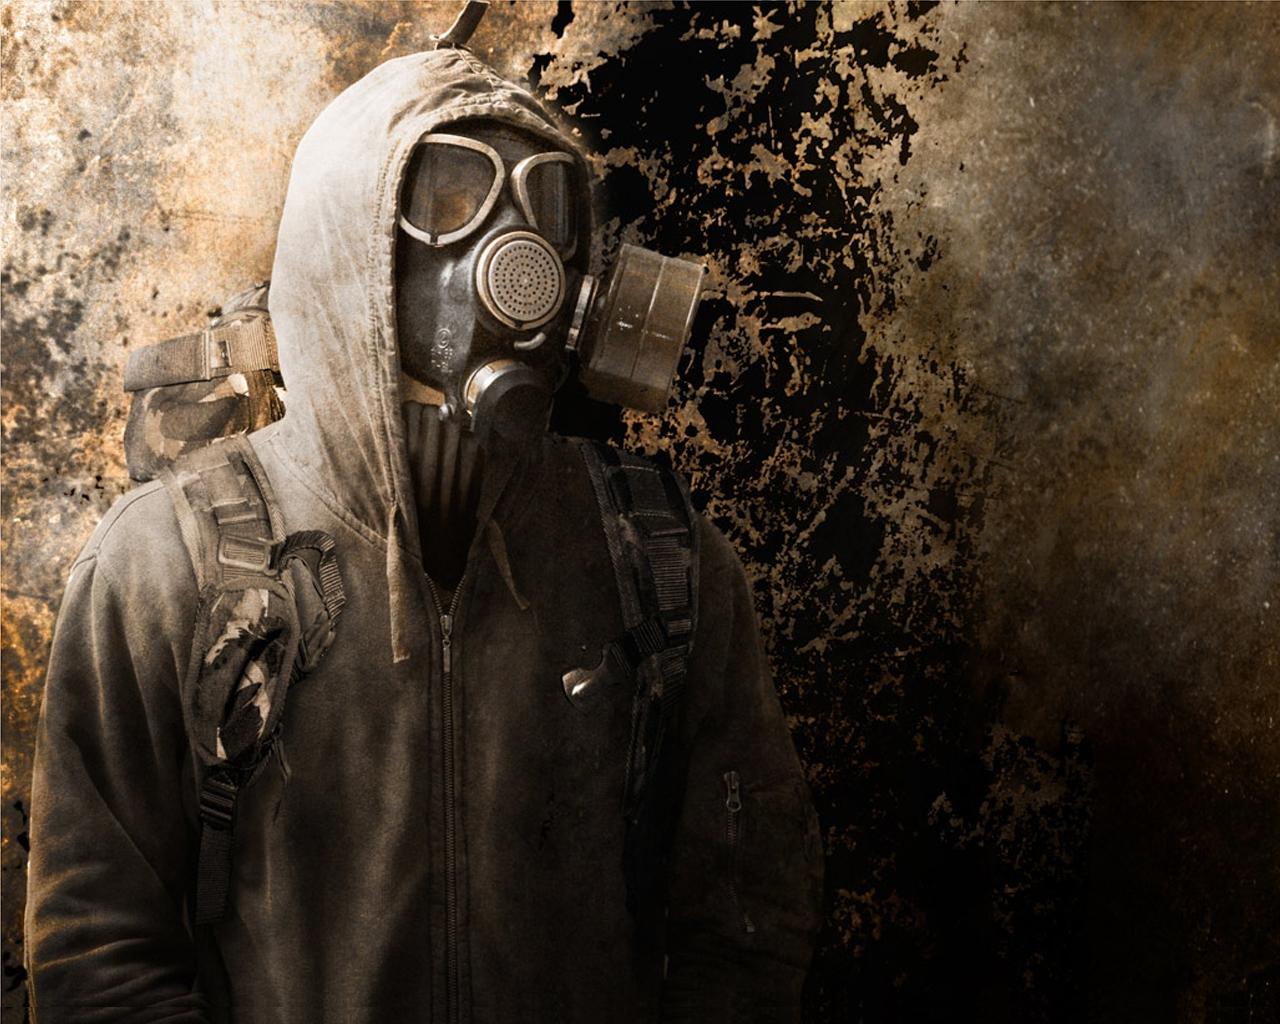 s t a l k e r, gas mask, video game, biohazard, radioactive